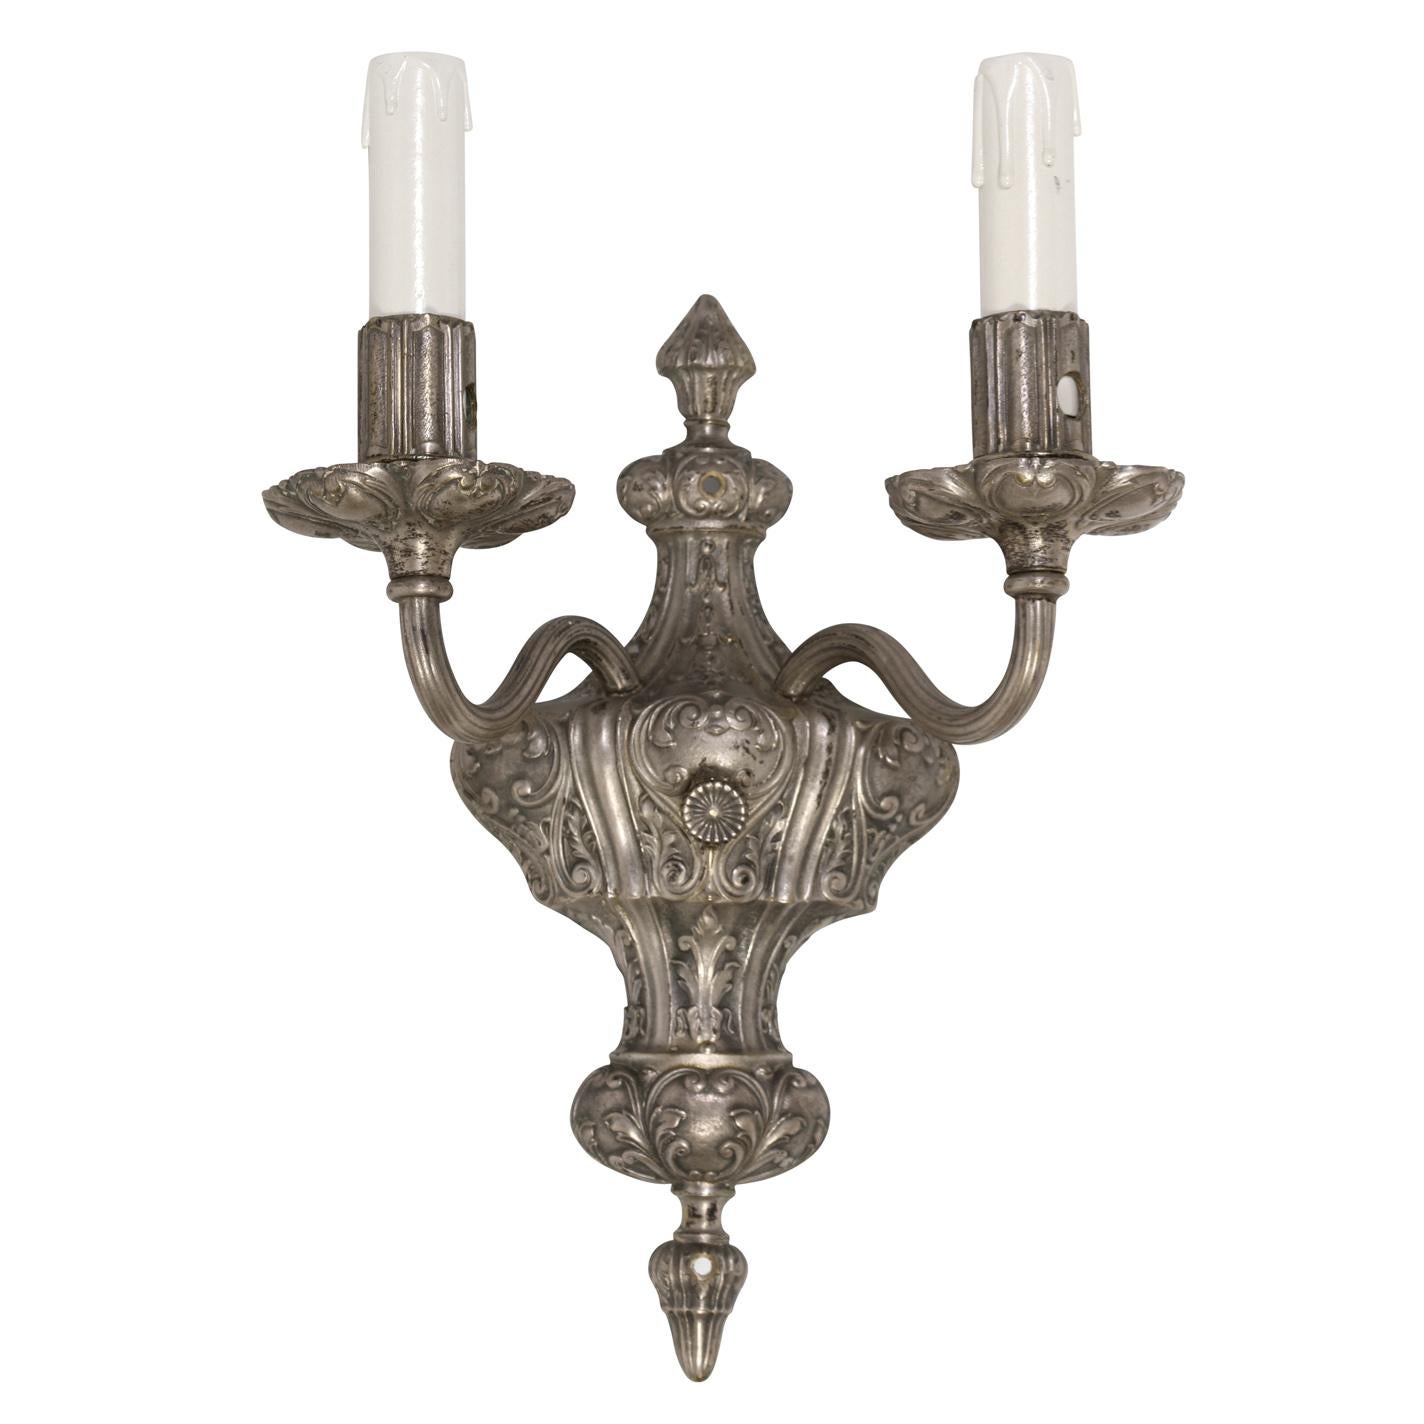 A pair of caldwell carved silver tone double arm wall sconces.